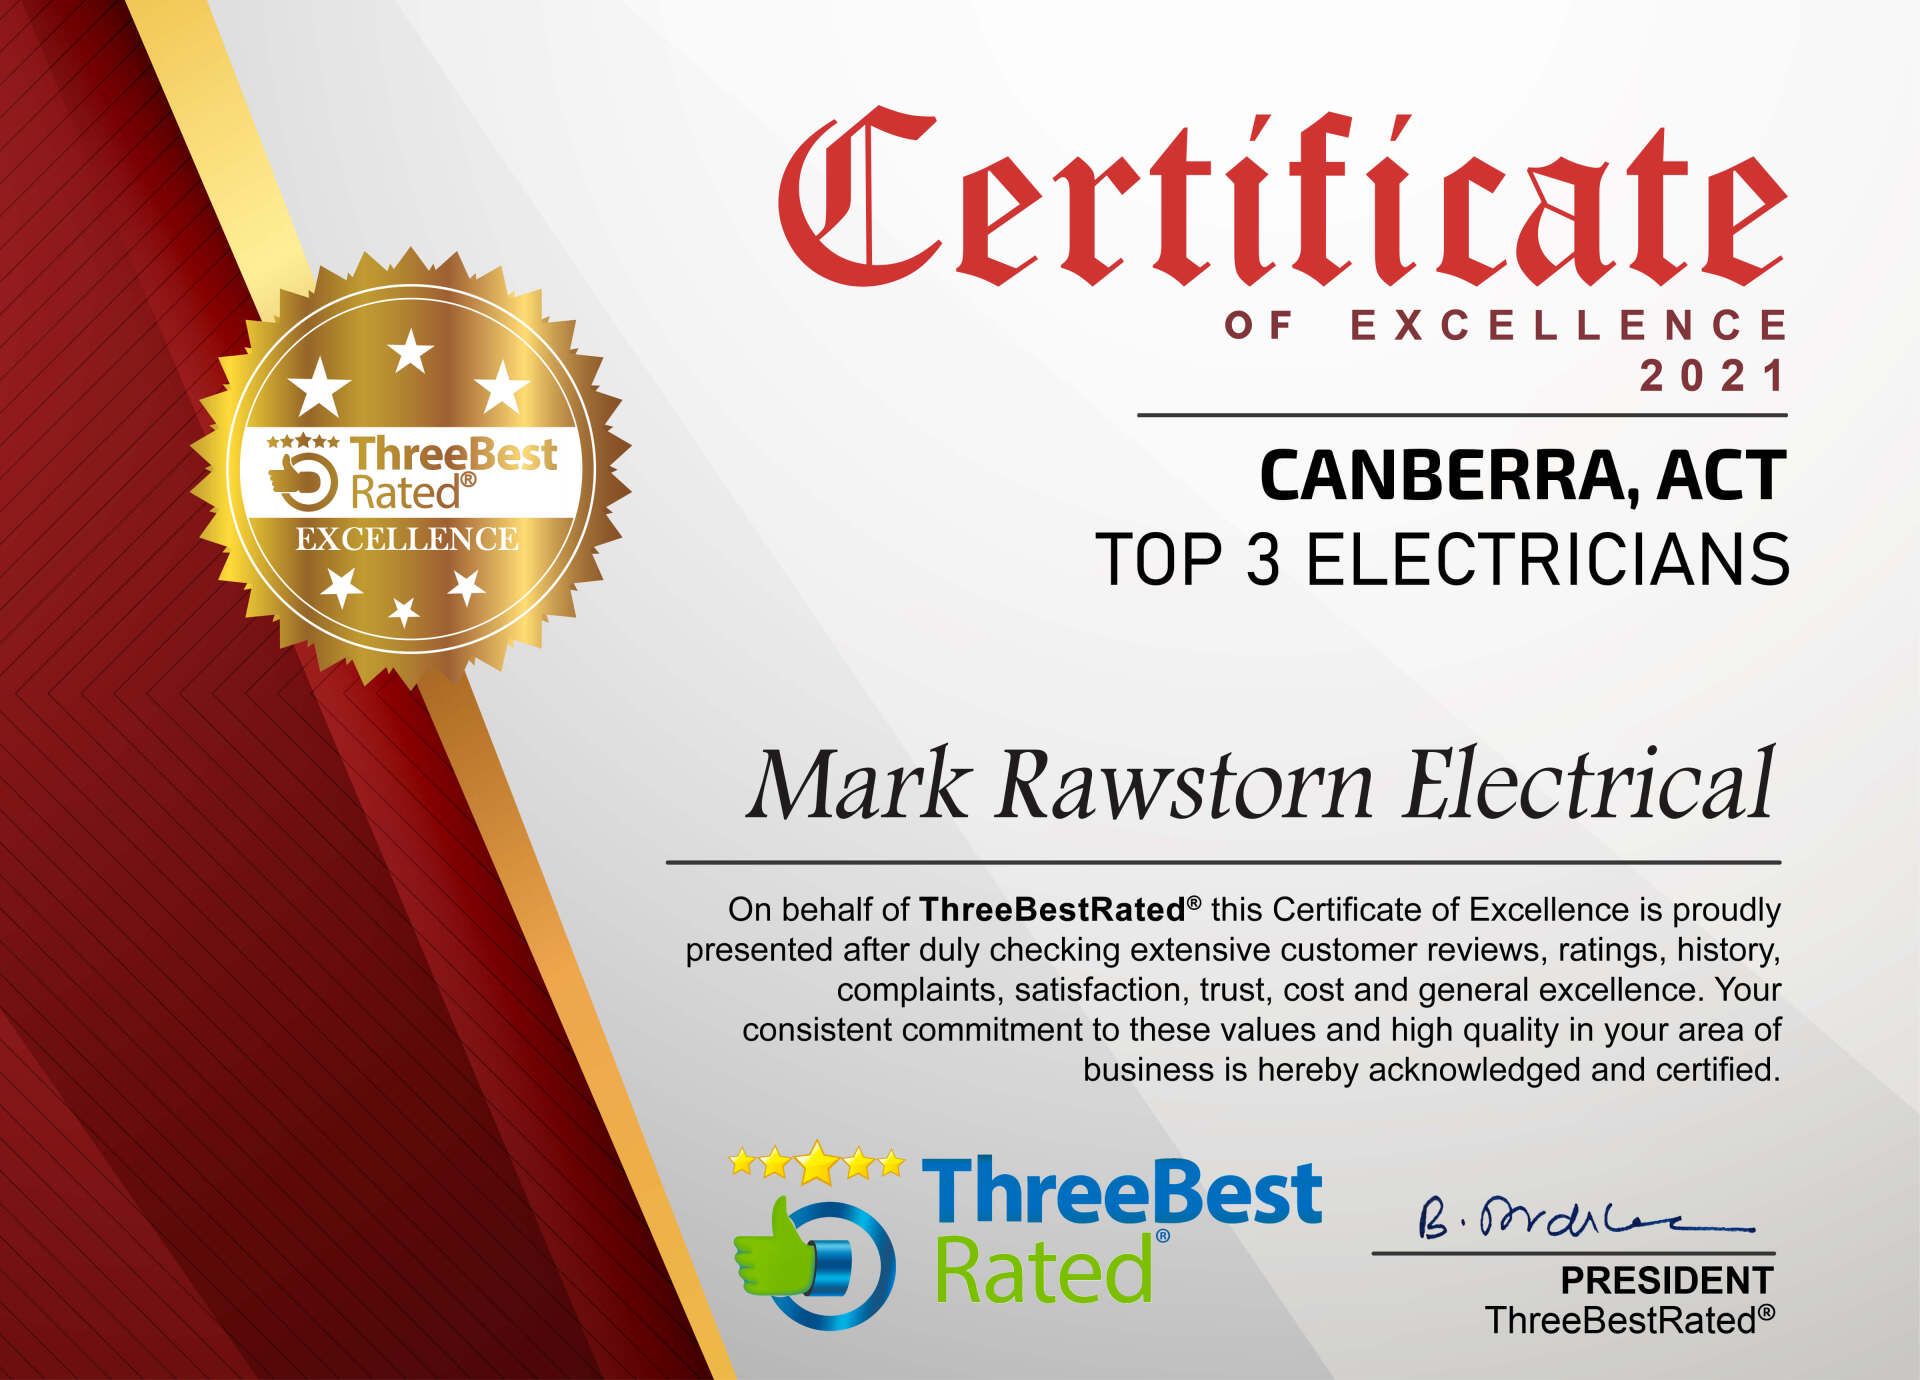 Certificate of Excellence Top 3 Canberra Electricians